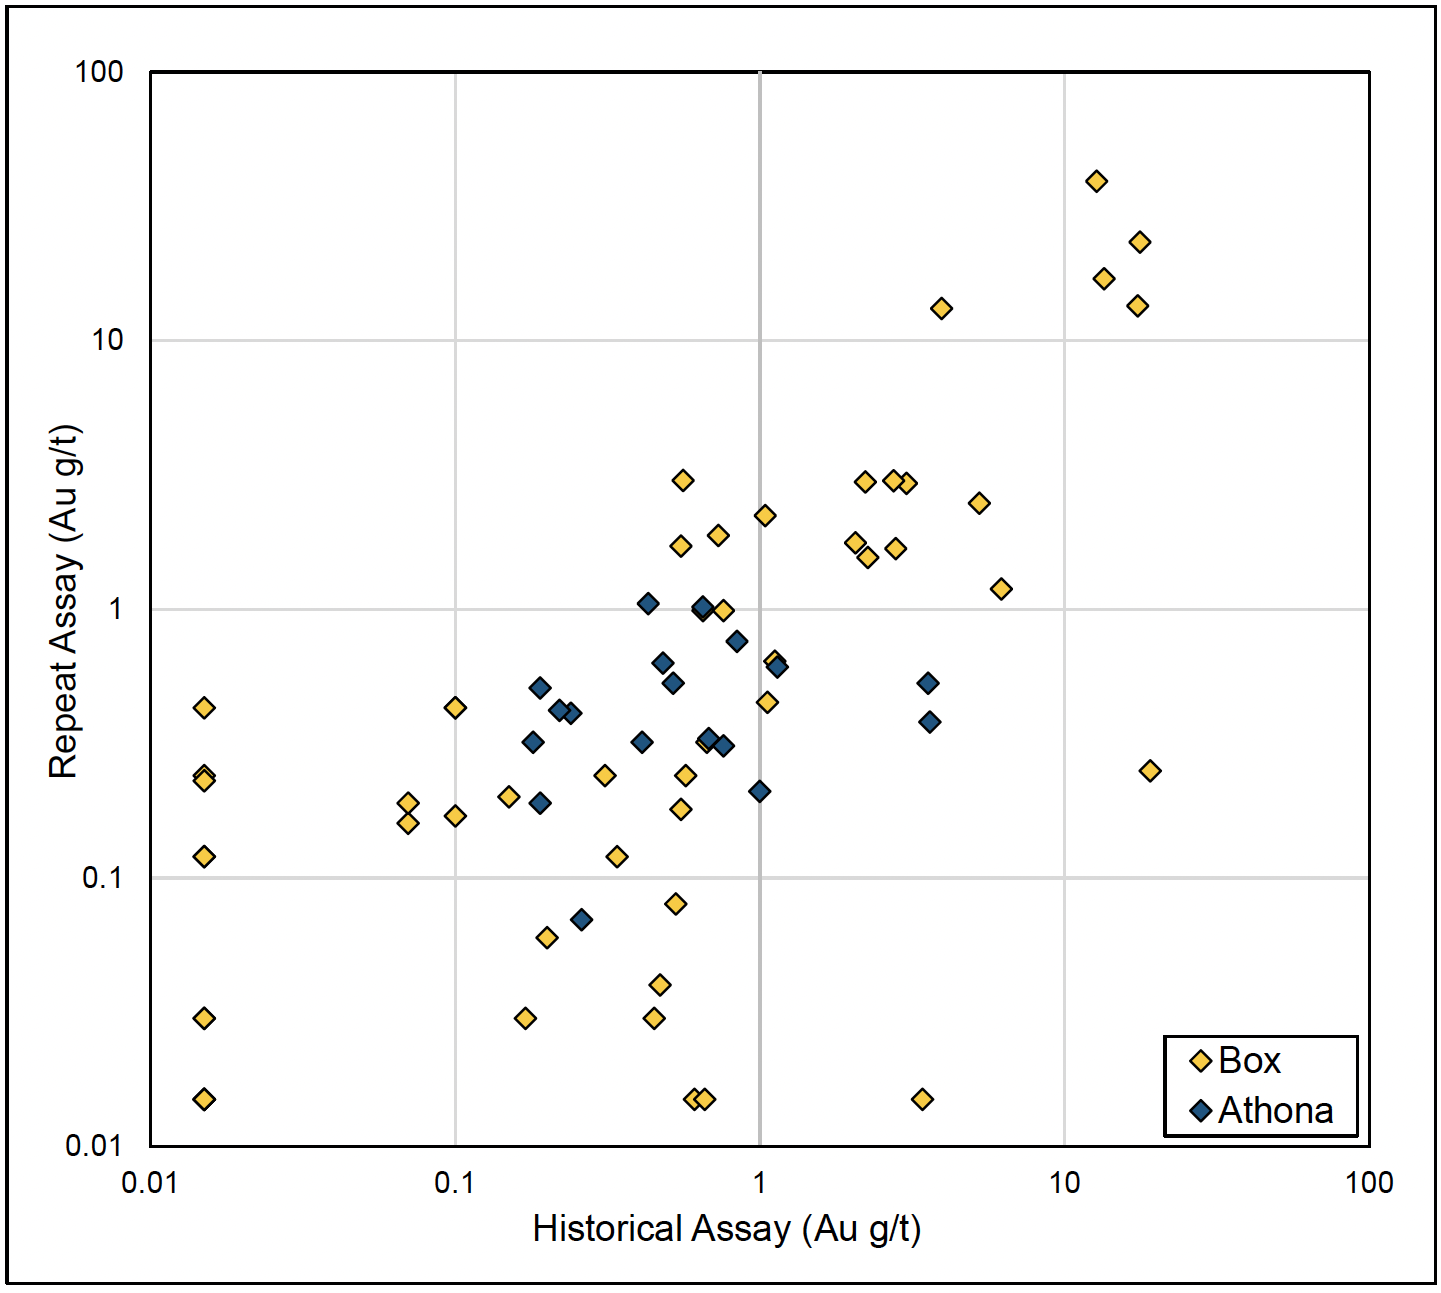 Figure 1 Plot showing gold assay results from 70 historical drill core samples